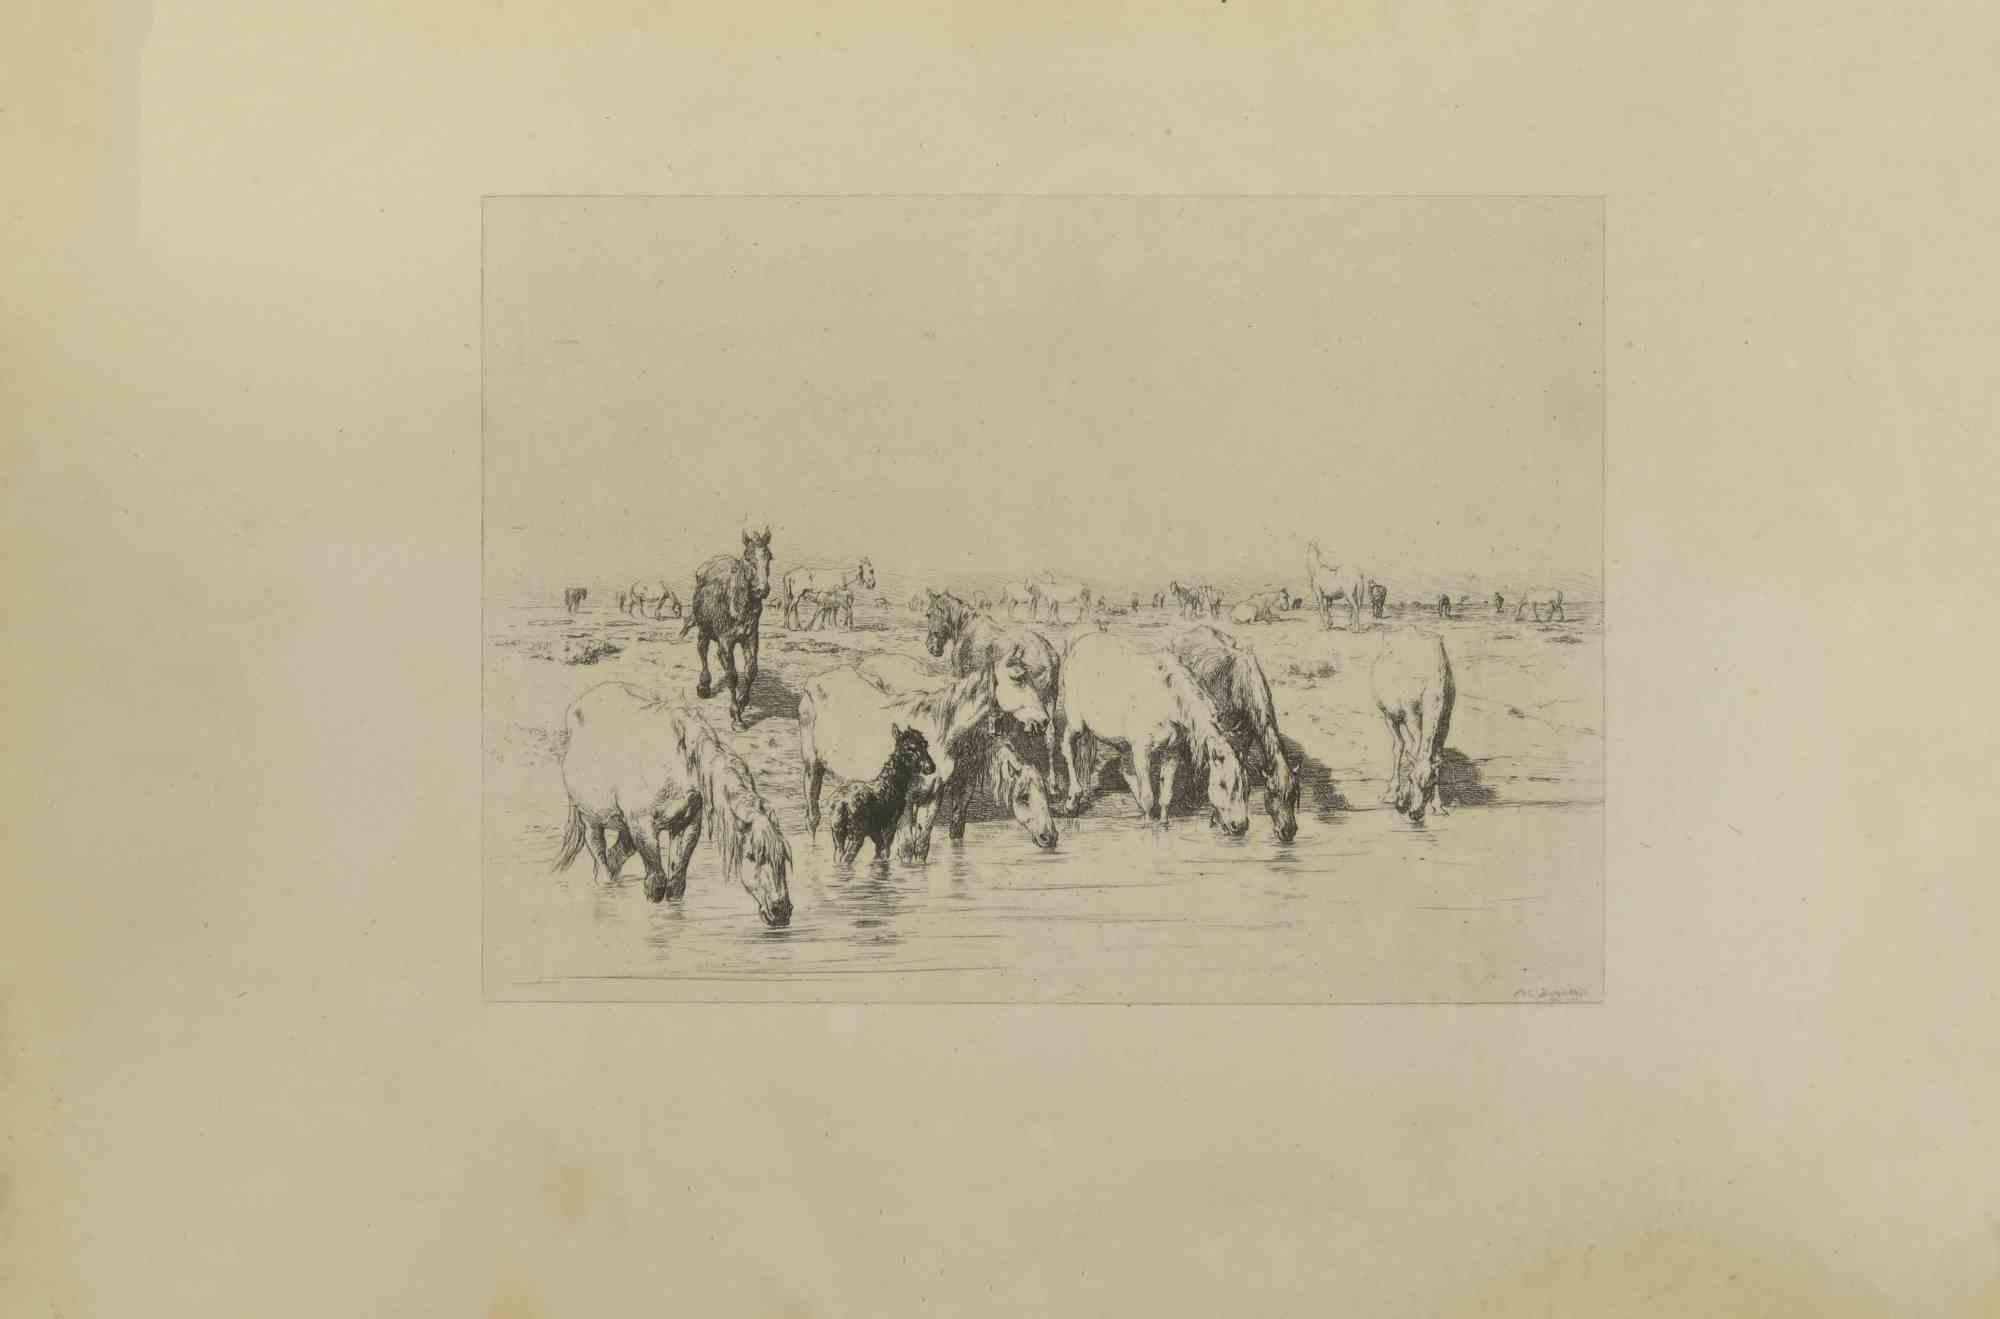 Herd of Horses is an original etching realized by Eugène Burnand (1850-1921) in the Late 19th century.

Signed on the plate.

Good conditions with foxing.
 
The artwork is realized through short and deft strokes, an admirable scene created by